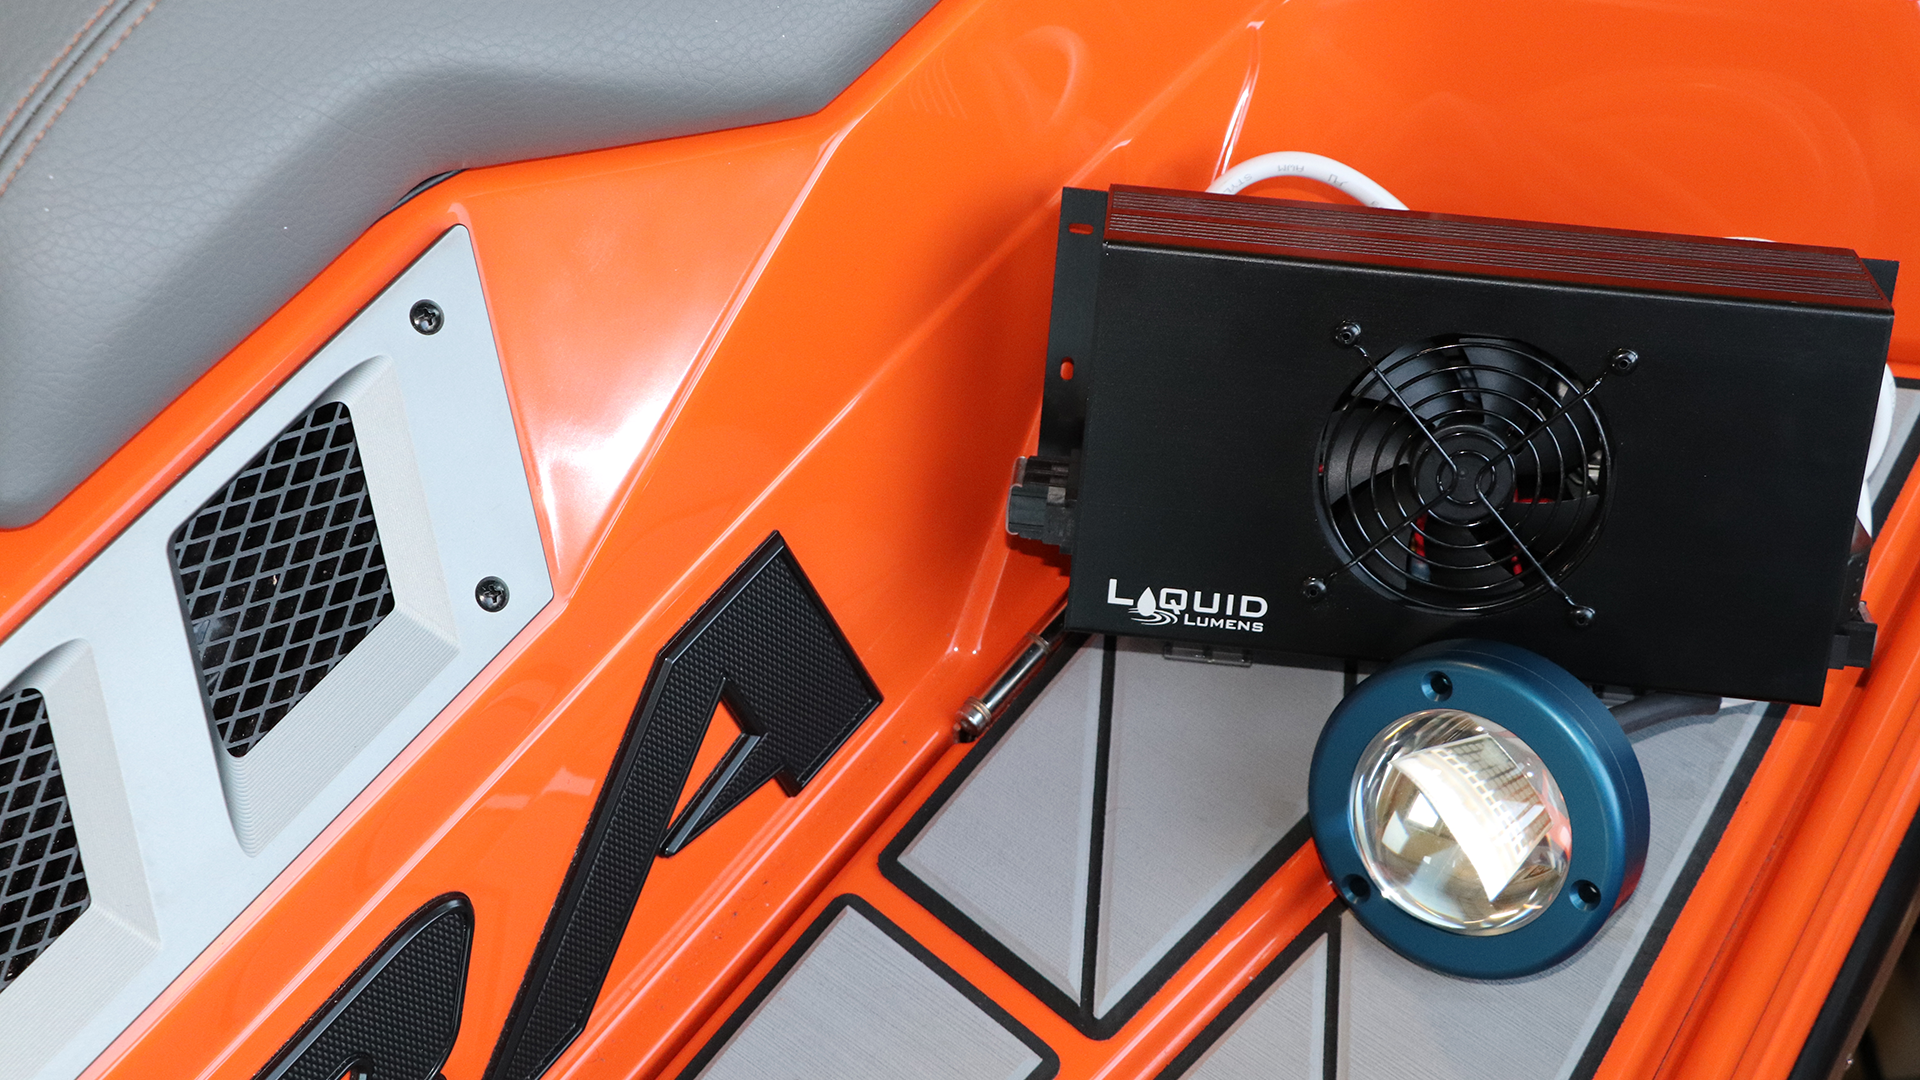 Liquid Lumens Launches Exclusive Partnership With Marine Products To Change The Marine Lighting Game